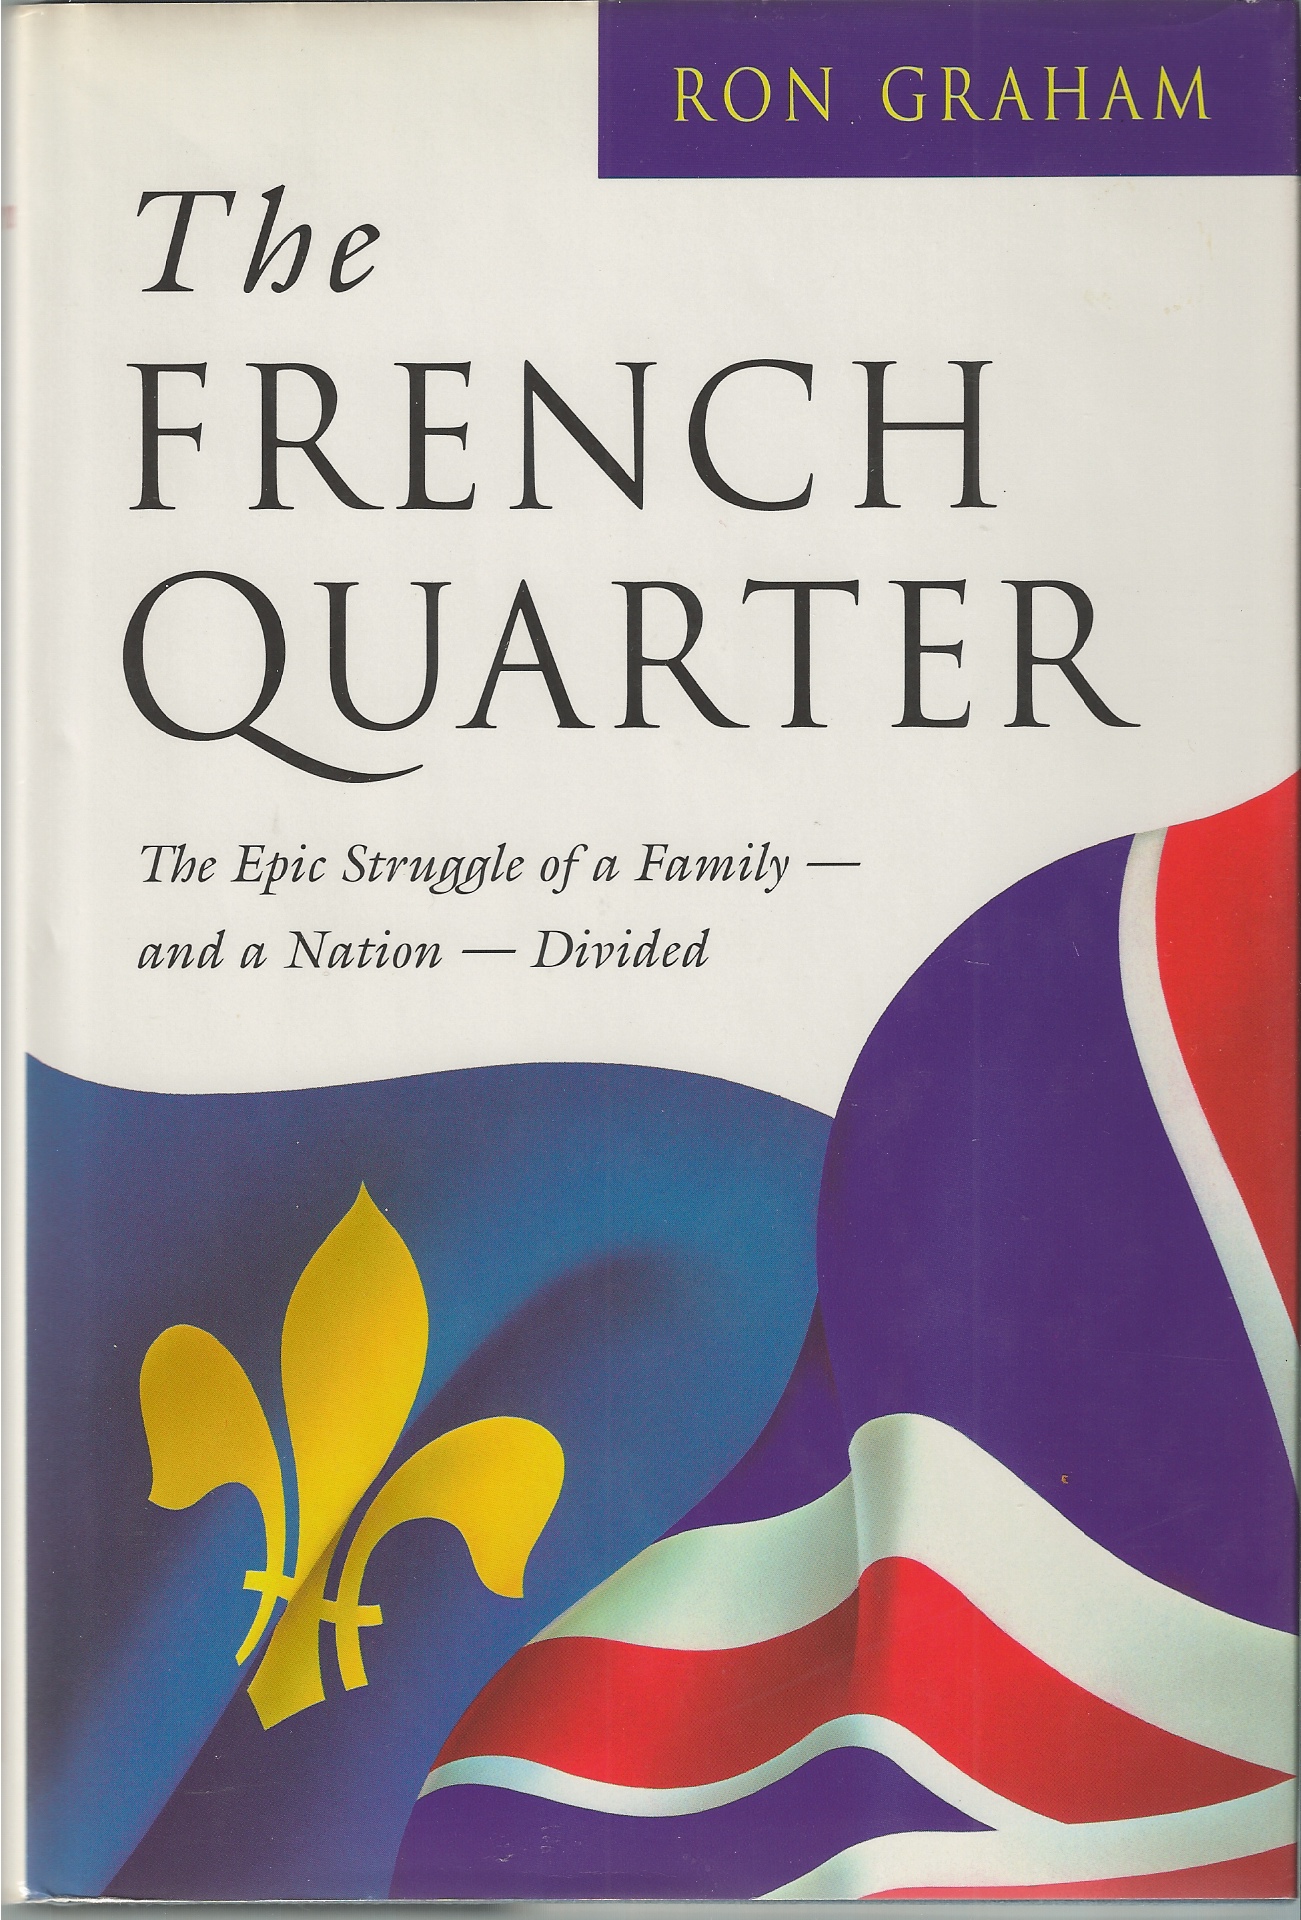 GRAHAM RON - French Quarter, the the Epic Struggle of a Family and a Nation Divided